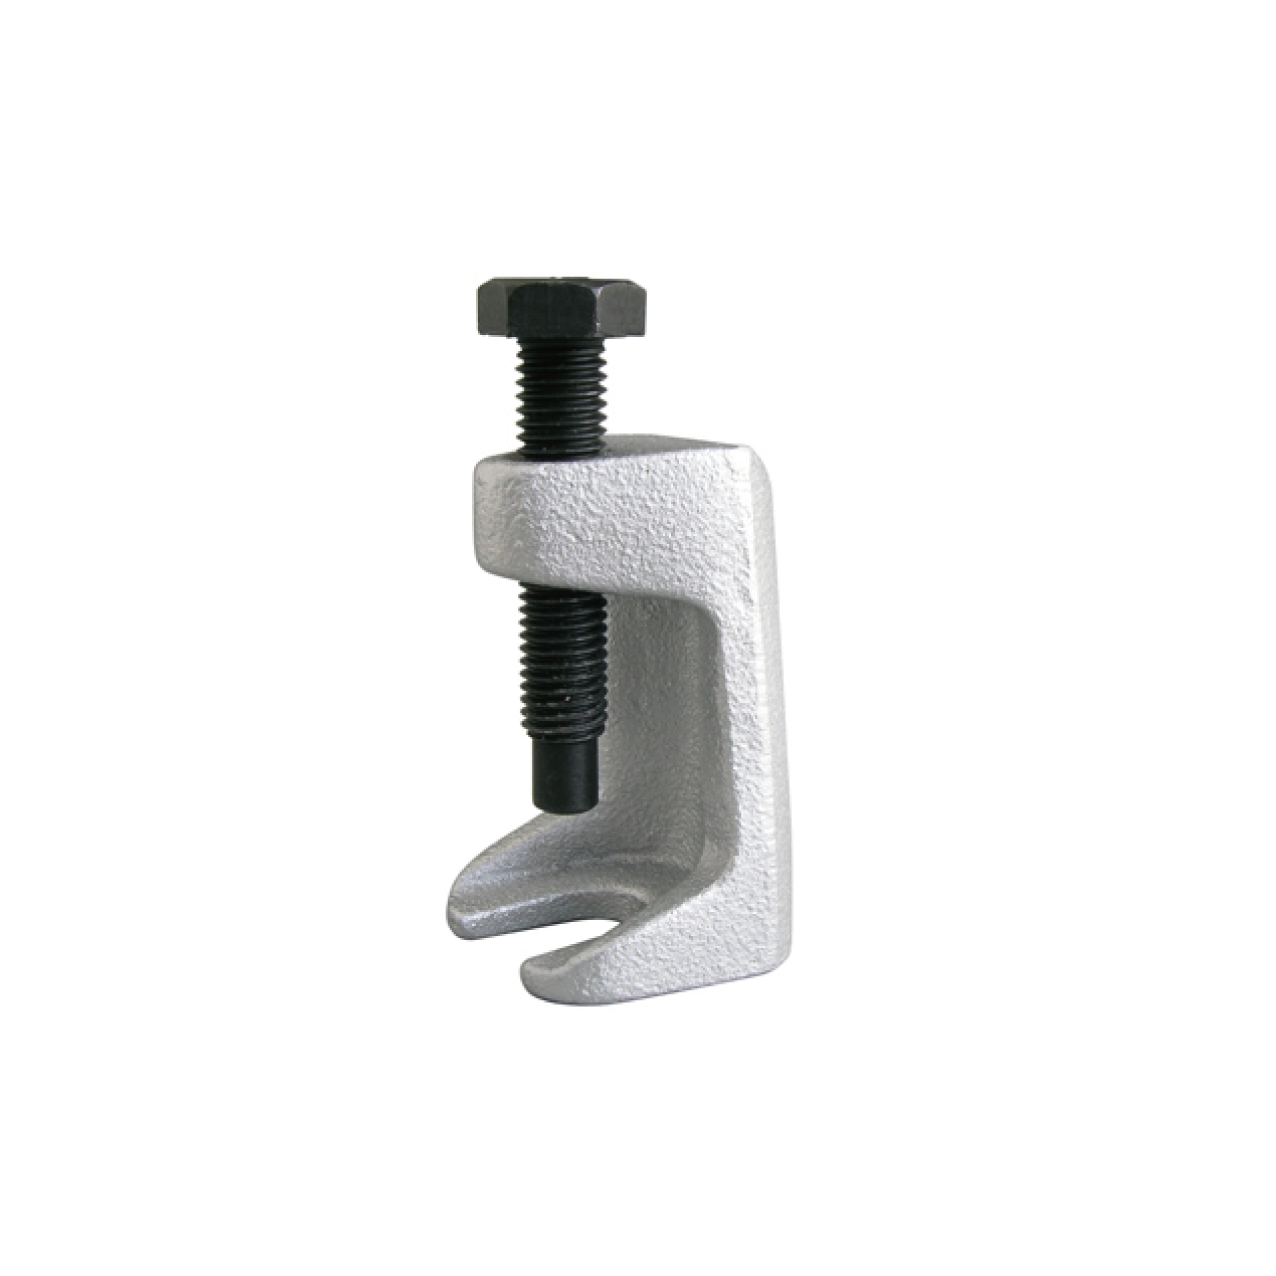 UNIVERSAL TIE ROD END TOOL (CASTING) (16mm)